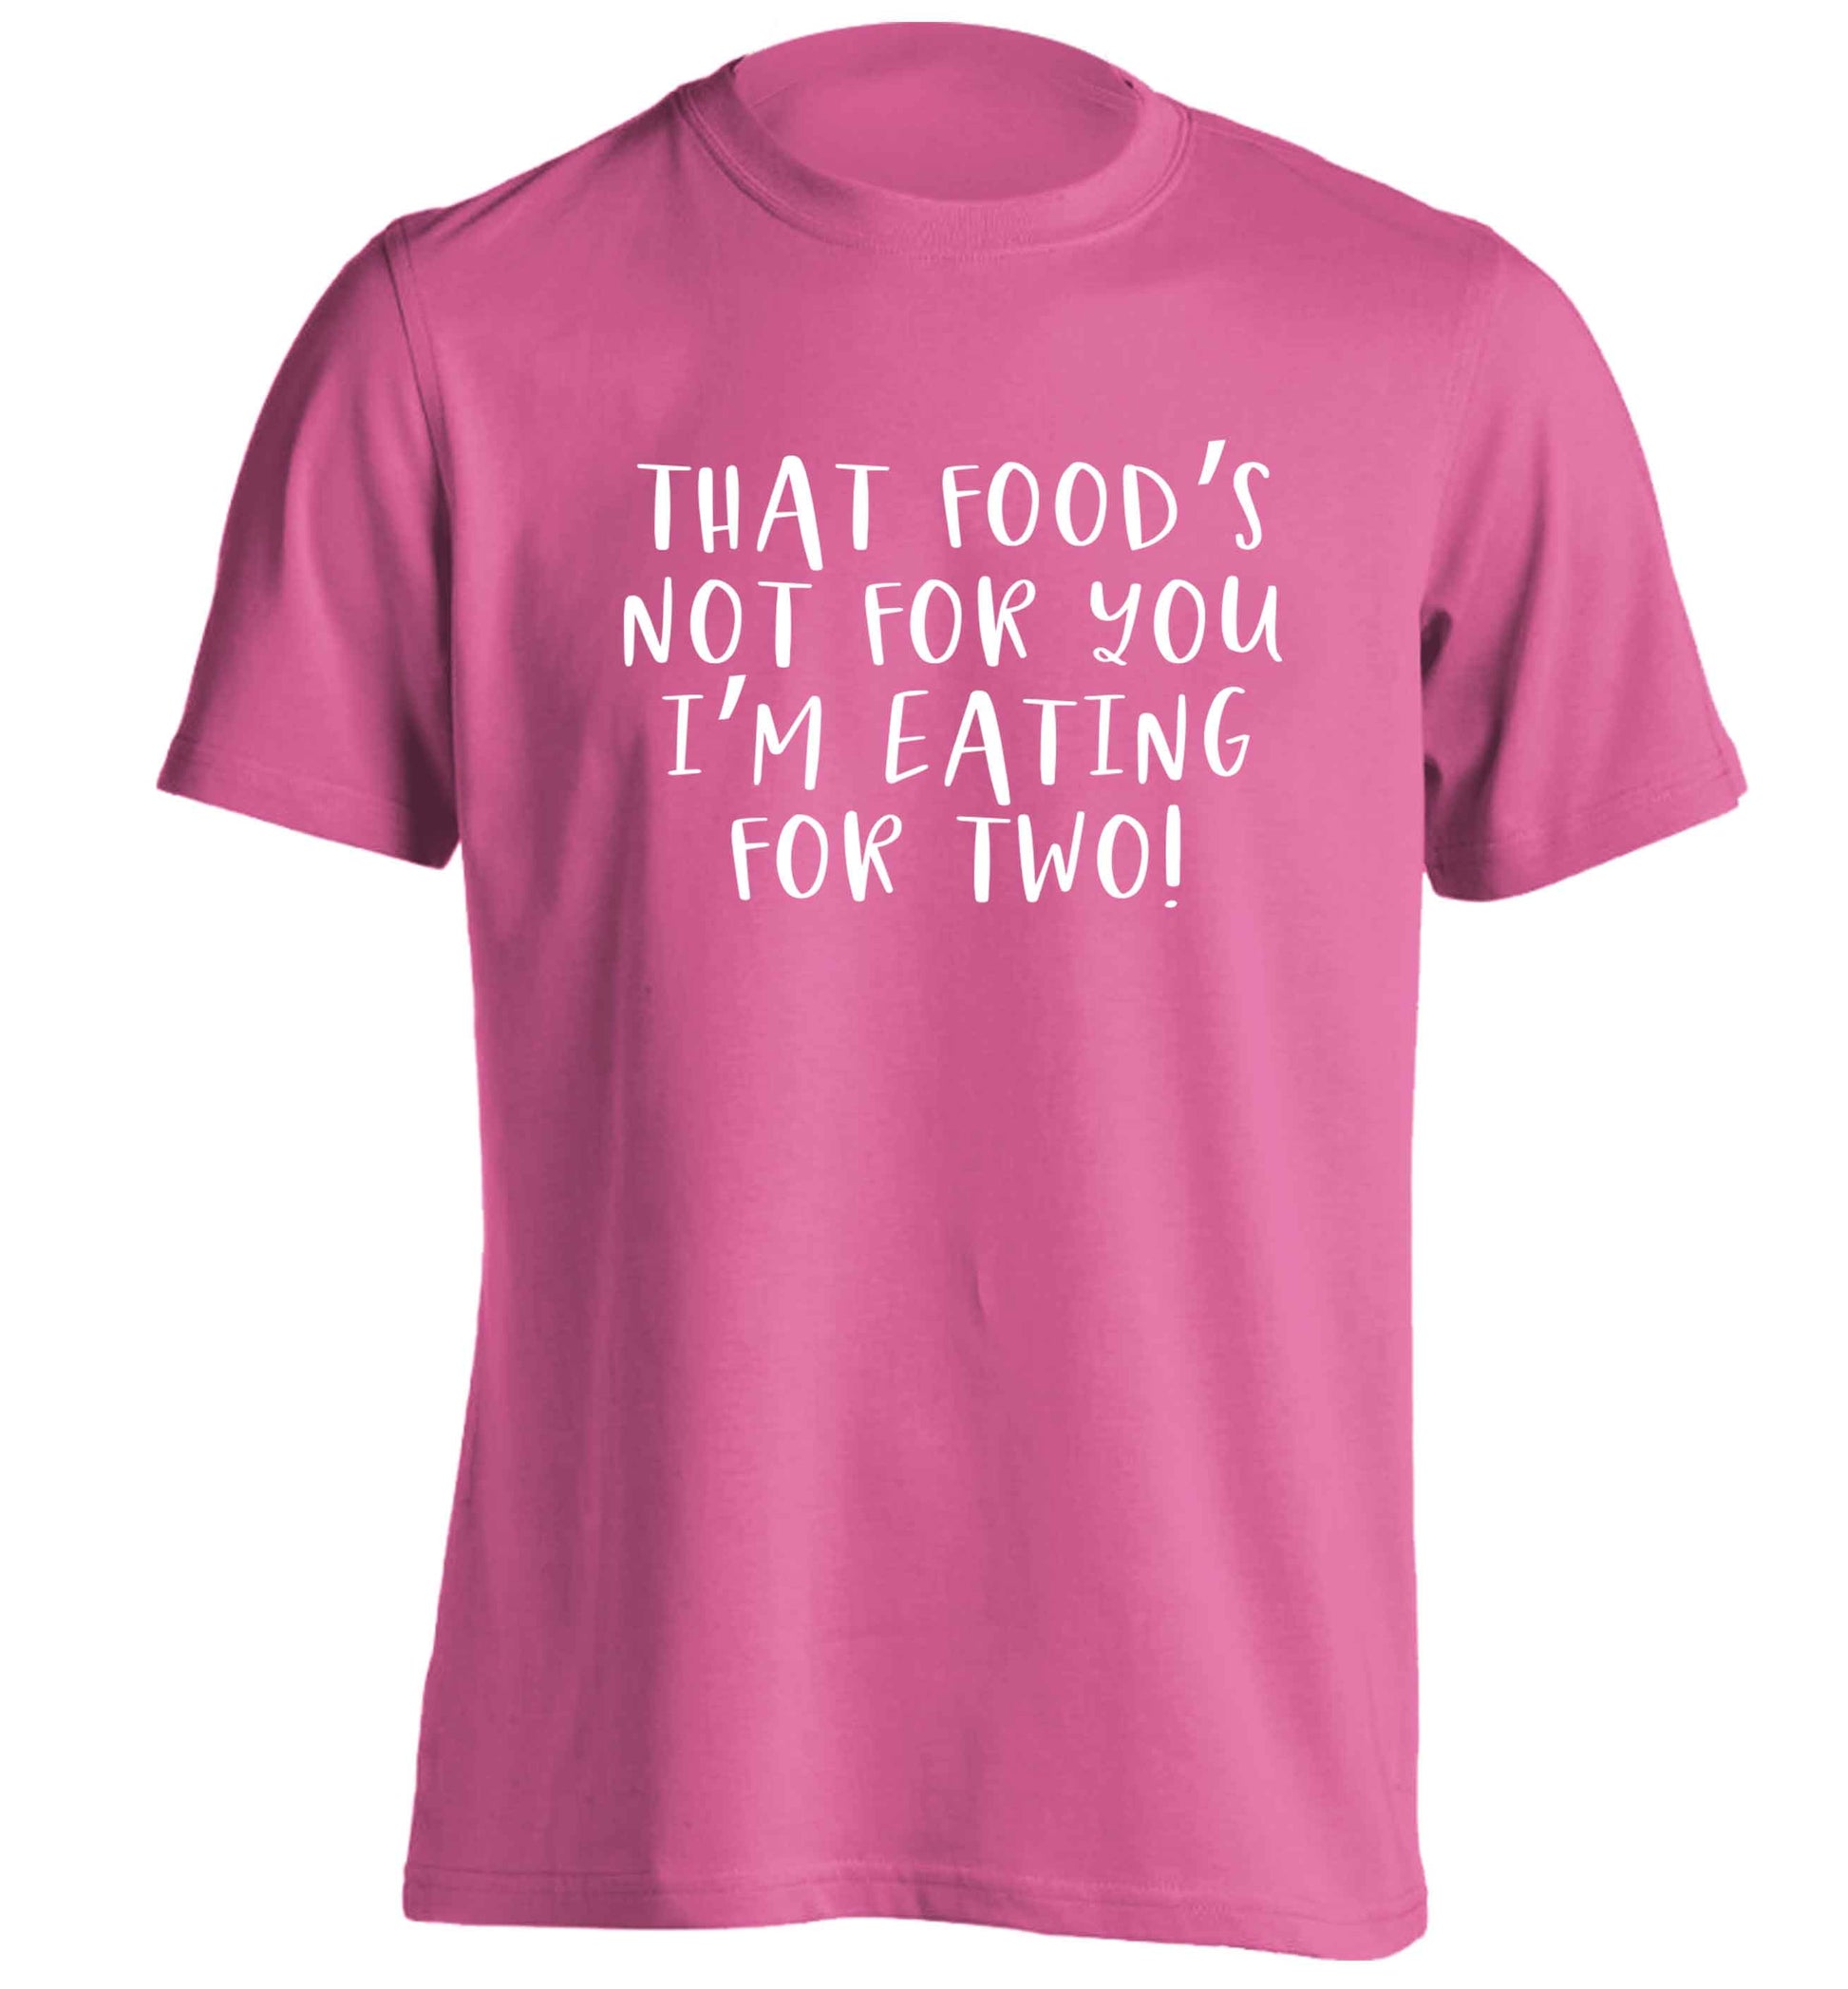 That food's not for you I'm eating for two adults unisex pink Tshirt 2XL